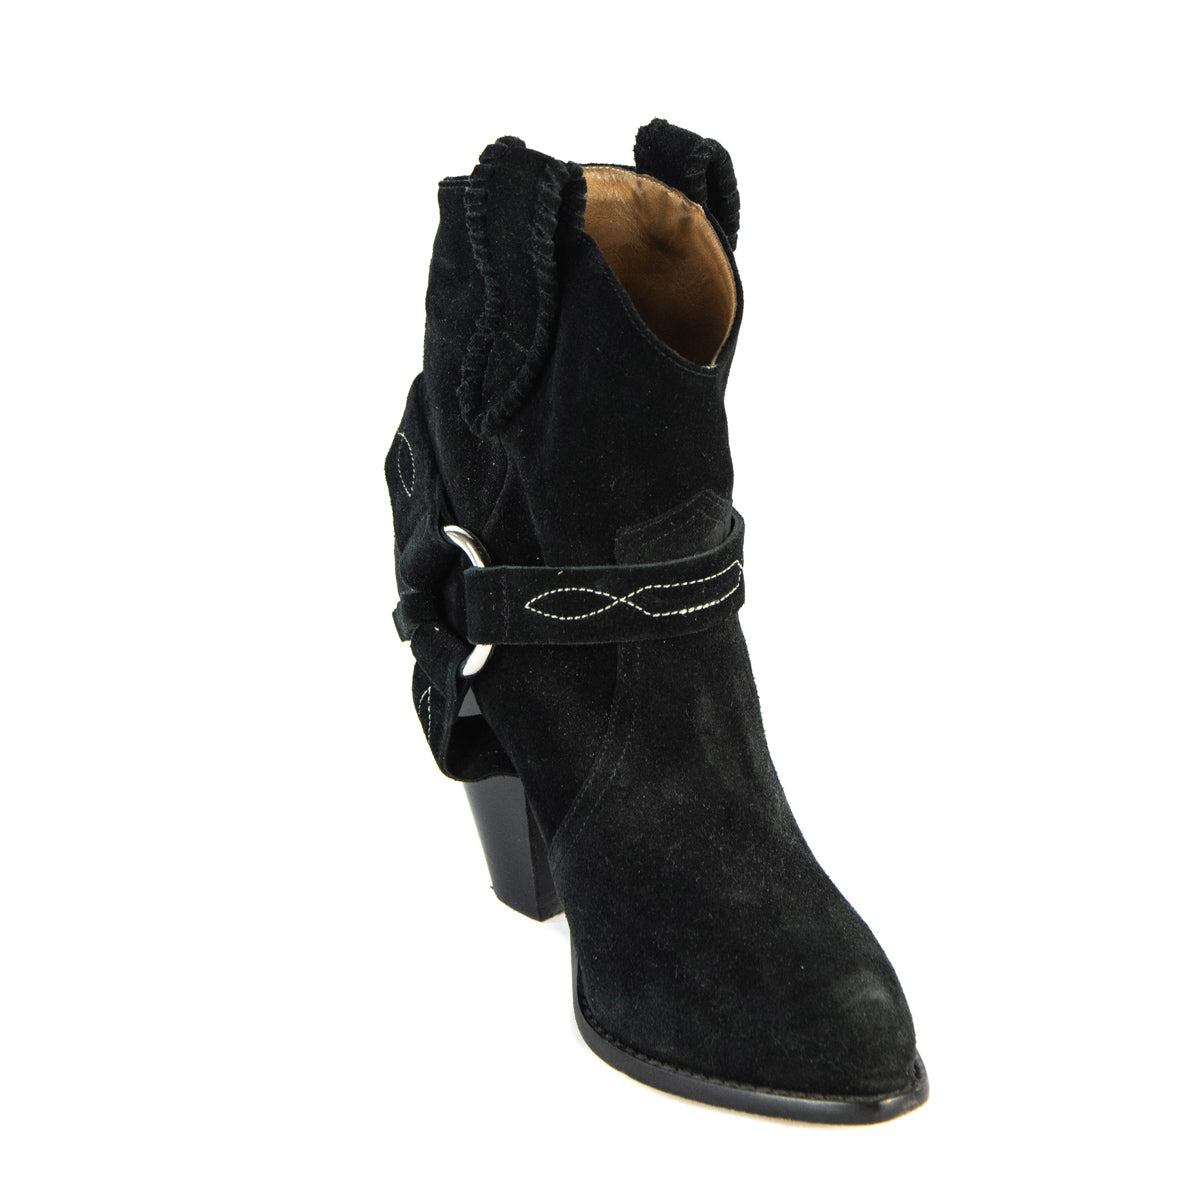 Isabel Marant Etoile Black Suede Ankle Boots Size 6 | FR 37 - Love that Bag etc - Preowned Authentic Designer Handbags & Preloved Fashions